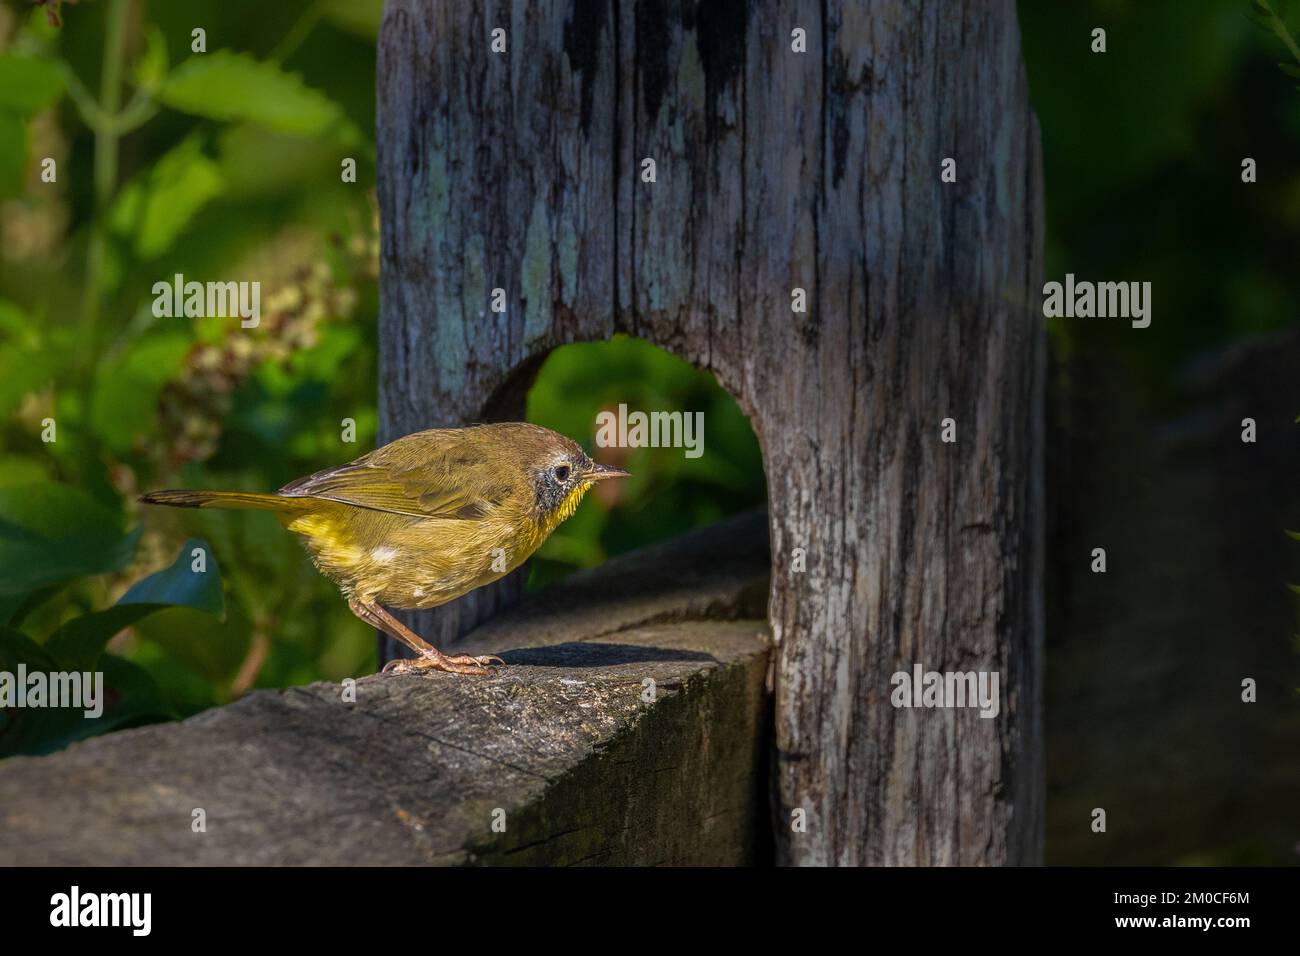 A close up of a Common yellowthroat (Geothlypis trichas) perched on a wooden fence Stock Photo